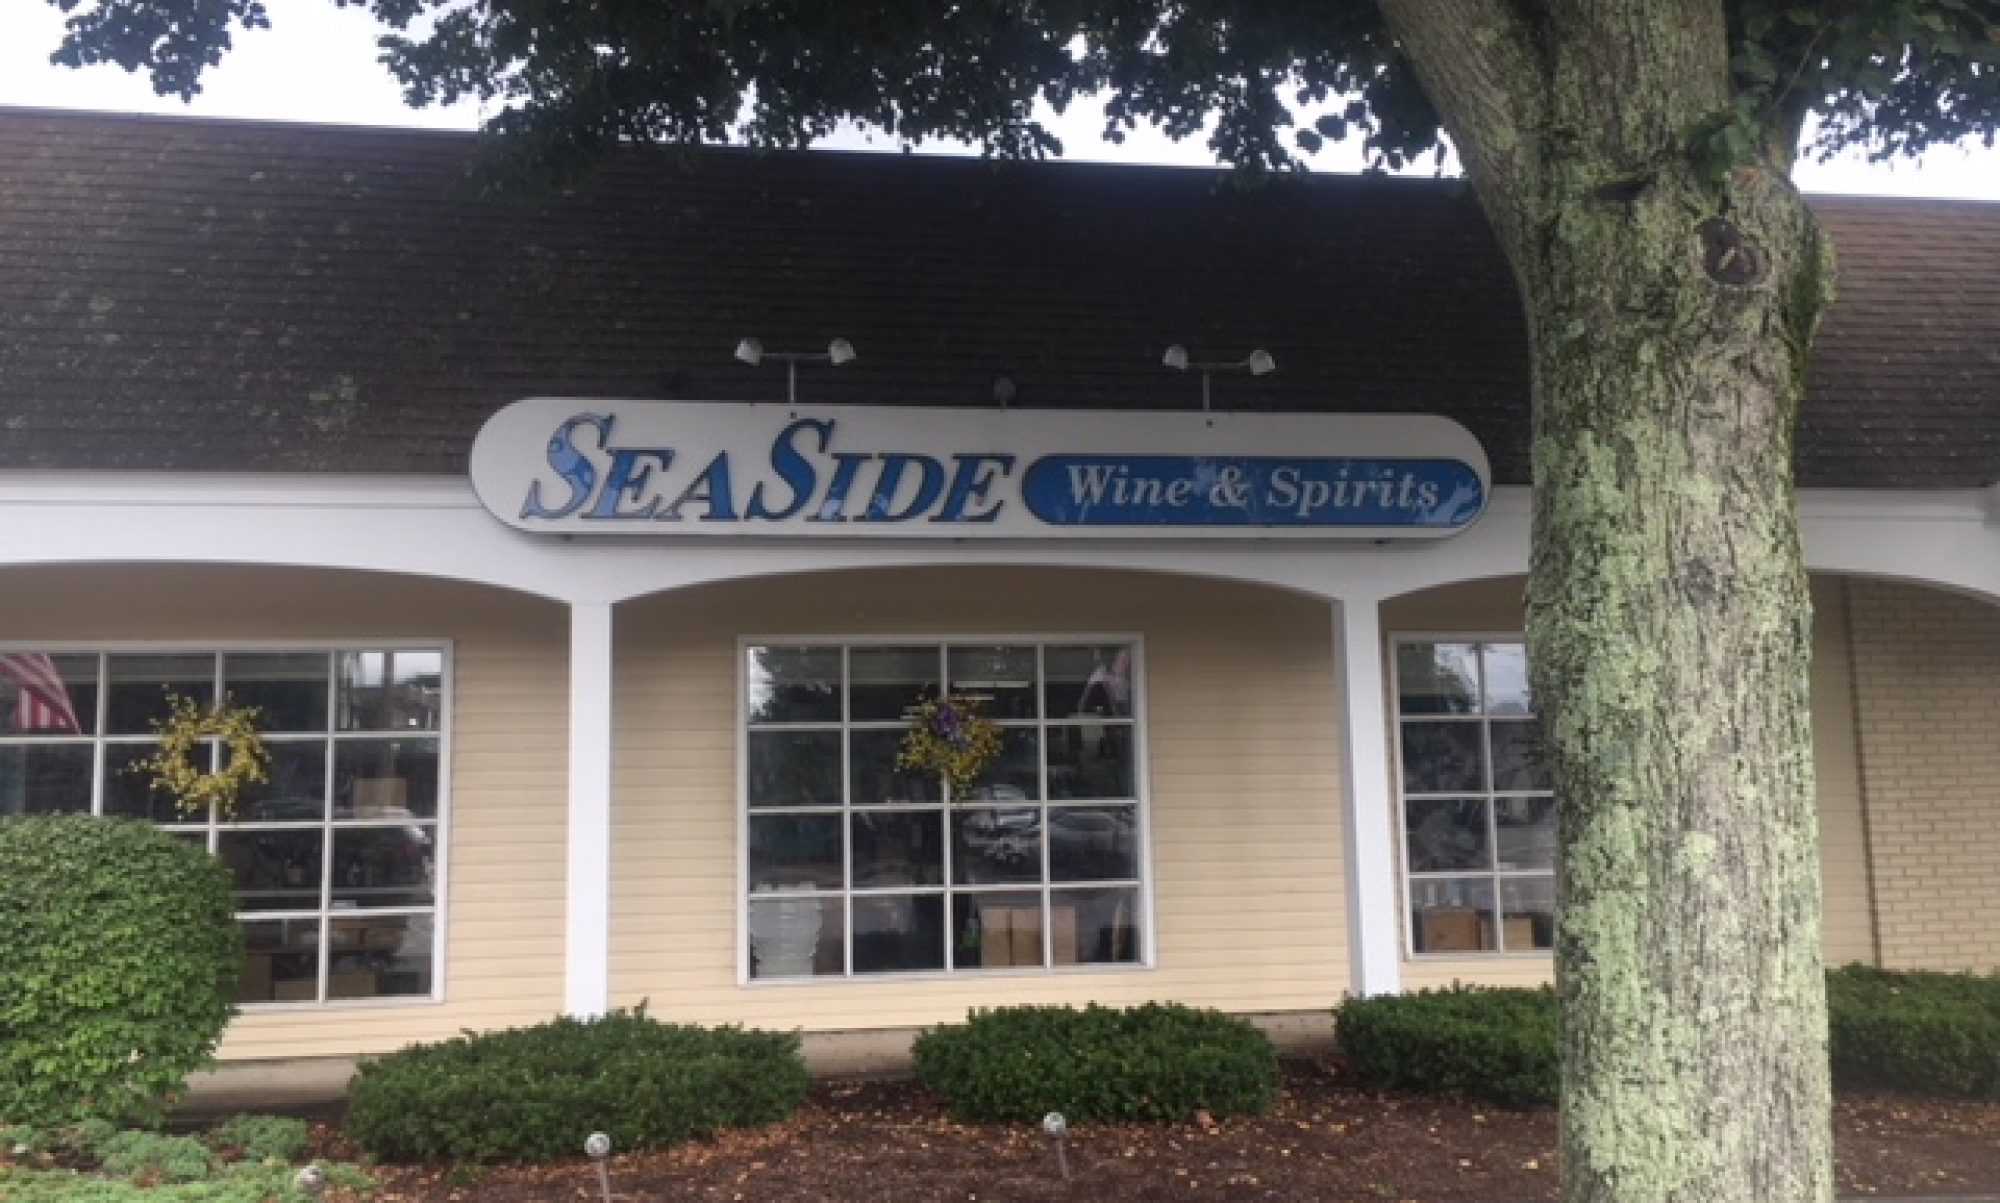 Seaside Wine and Spirits - Order Online - Delivery - Old Saybrook